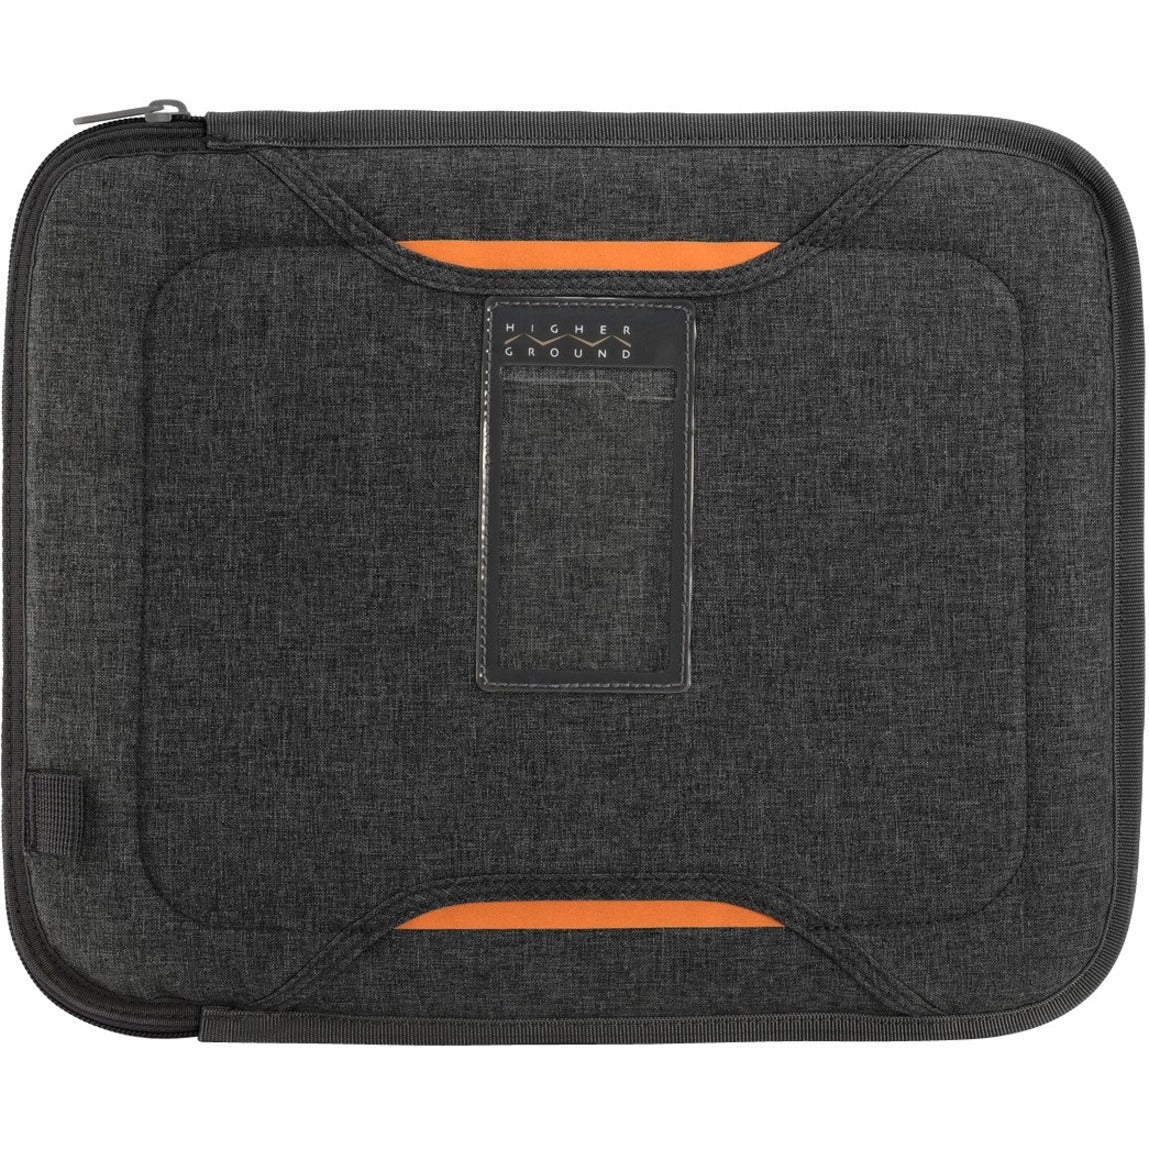 Higher Ground Flak Jacket Carrying Case (Sleeve) for 11" Apple Notebook Chromebook MacBook - Gray